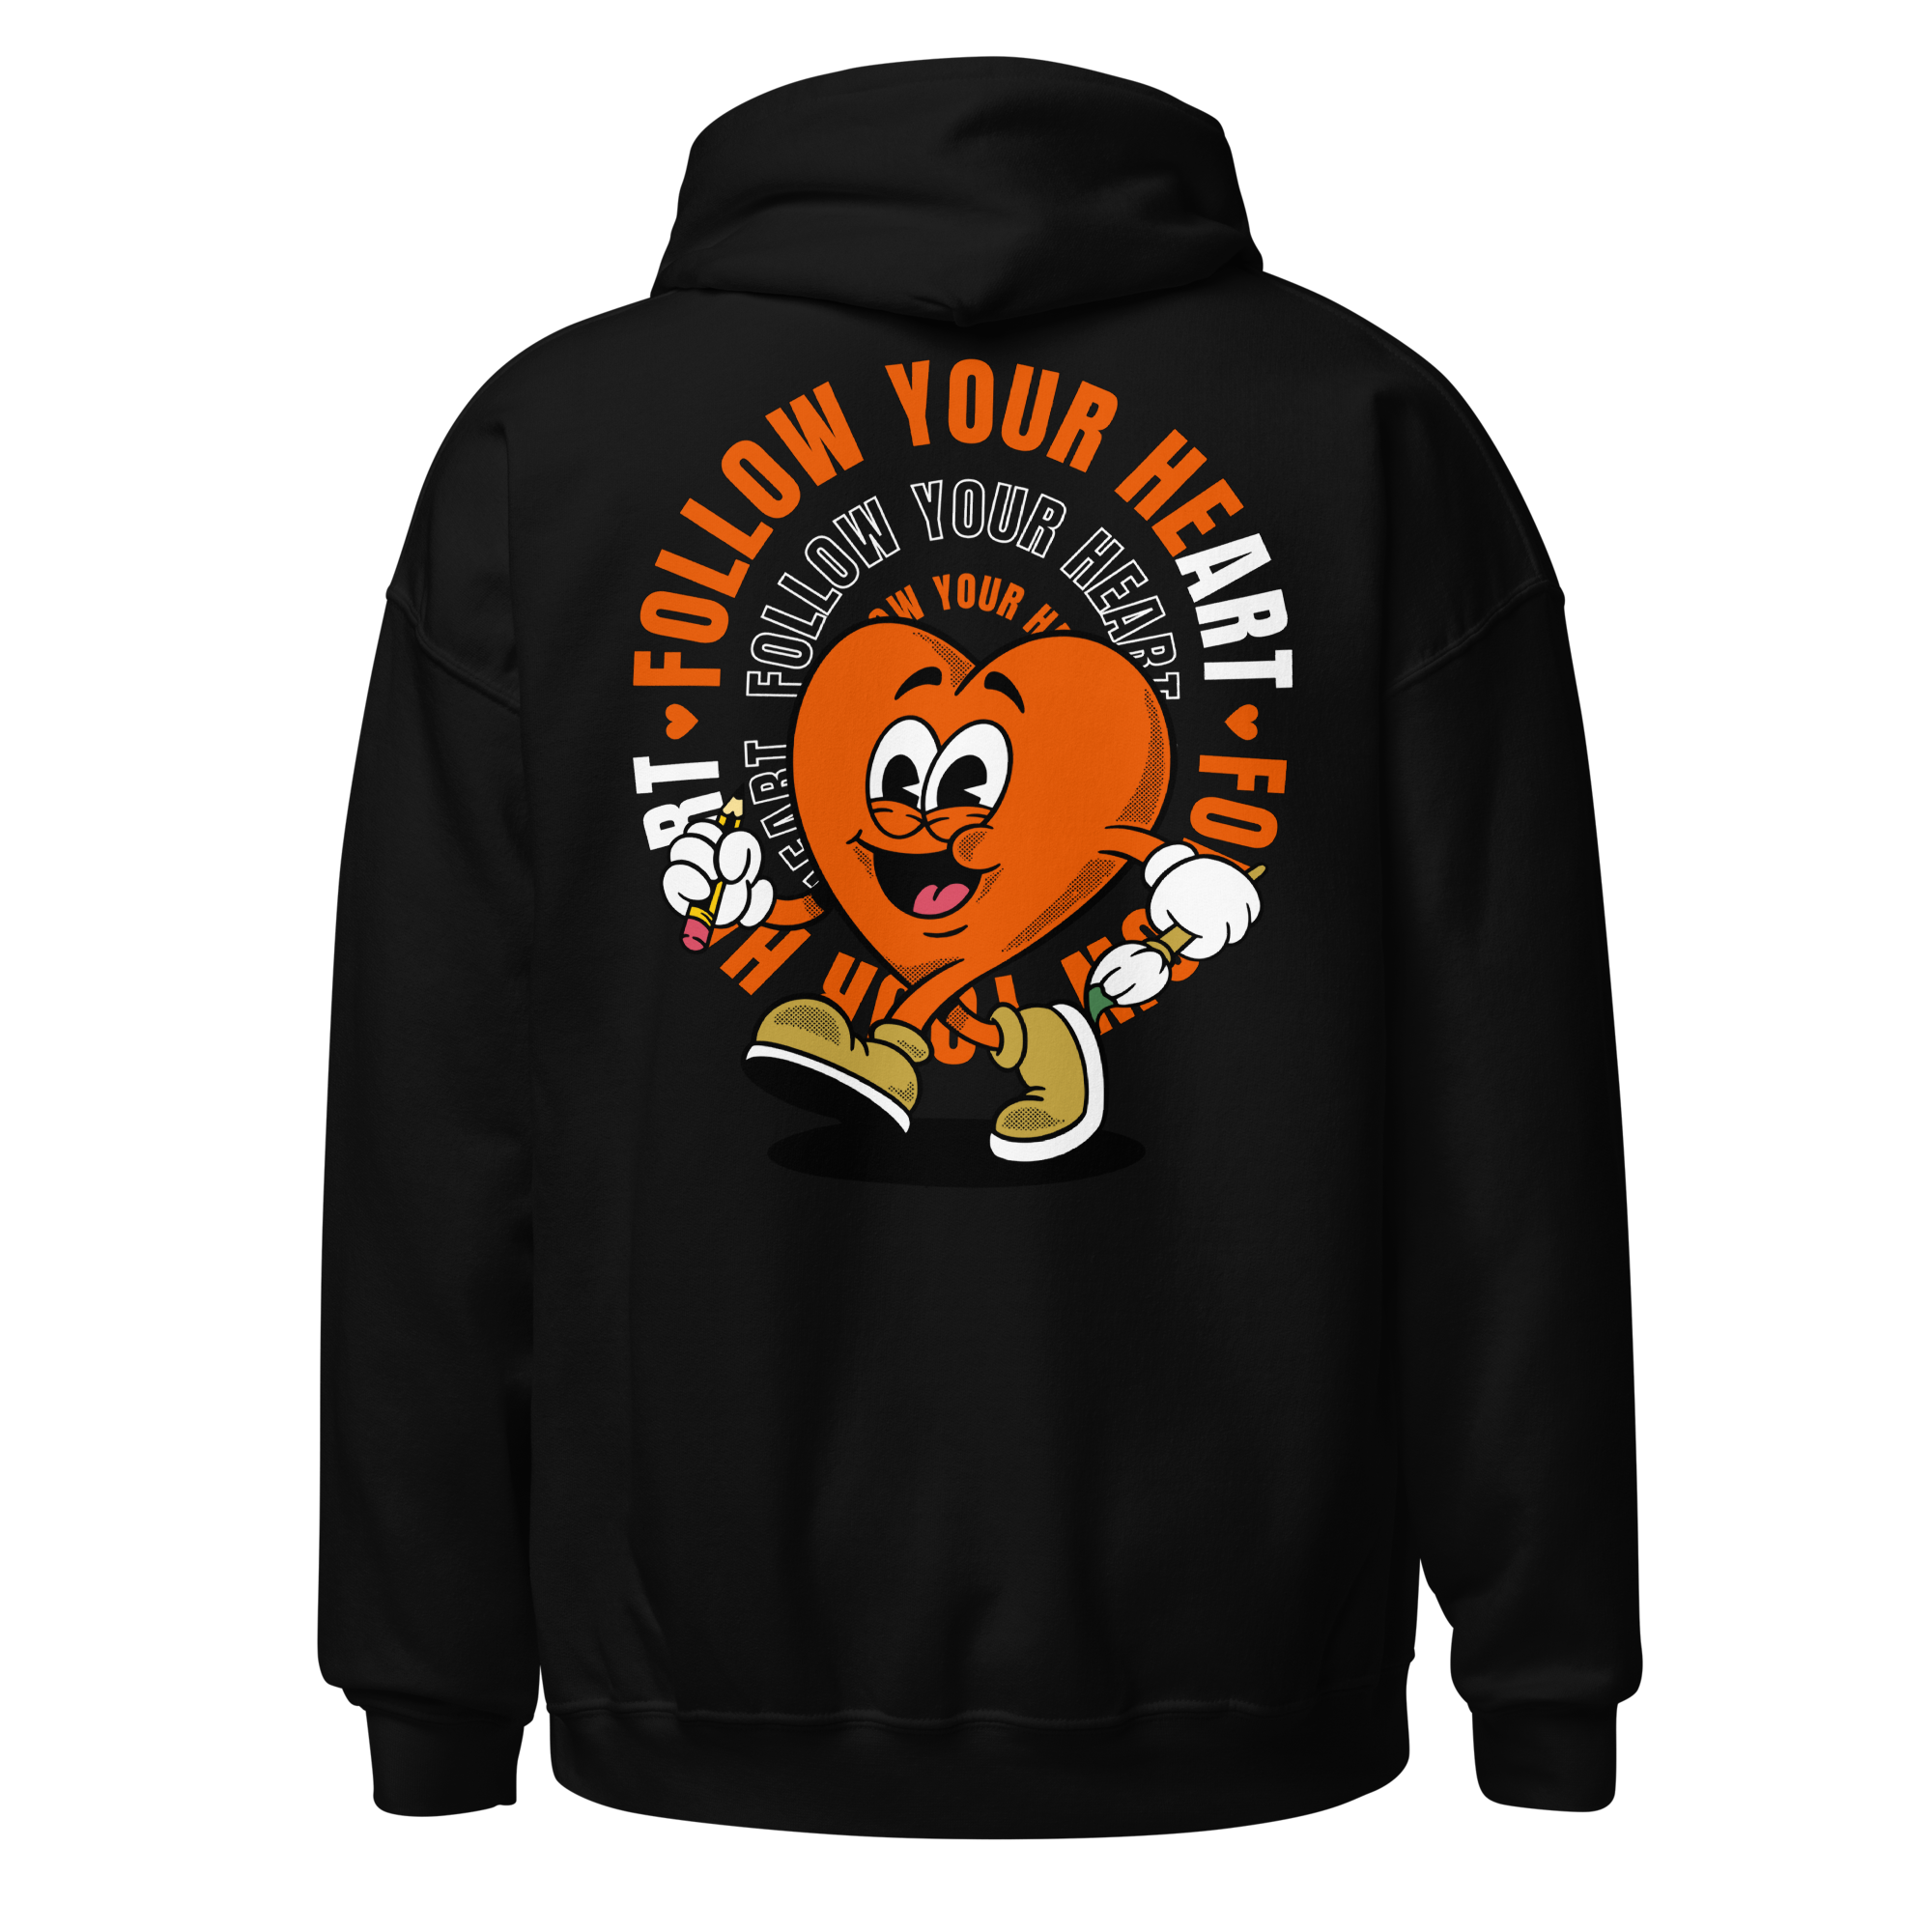 Follow Your Heart Embroidery Hoodie - Orange and Black (Unisex)